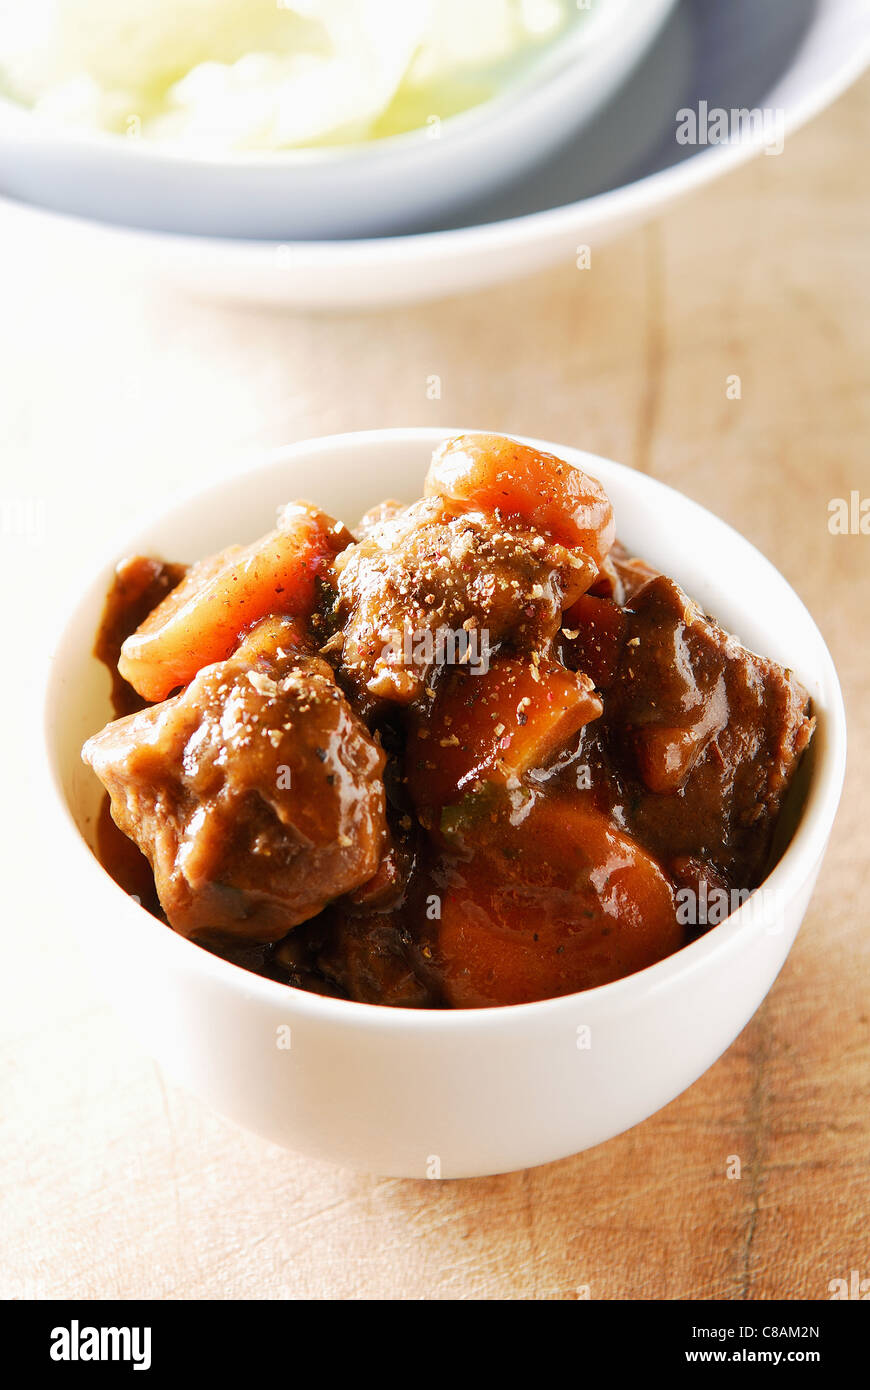 Beef and carrot stew Stock Photo